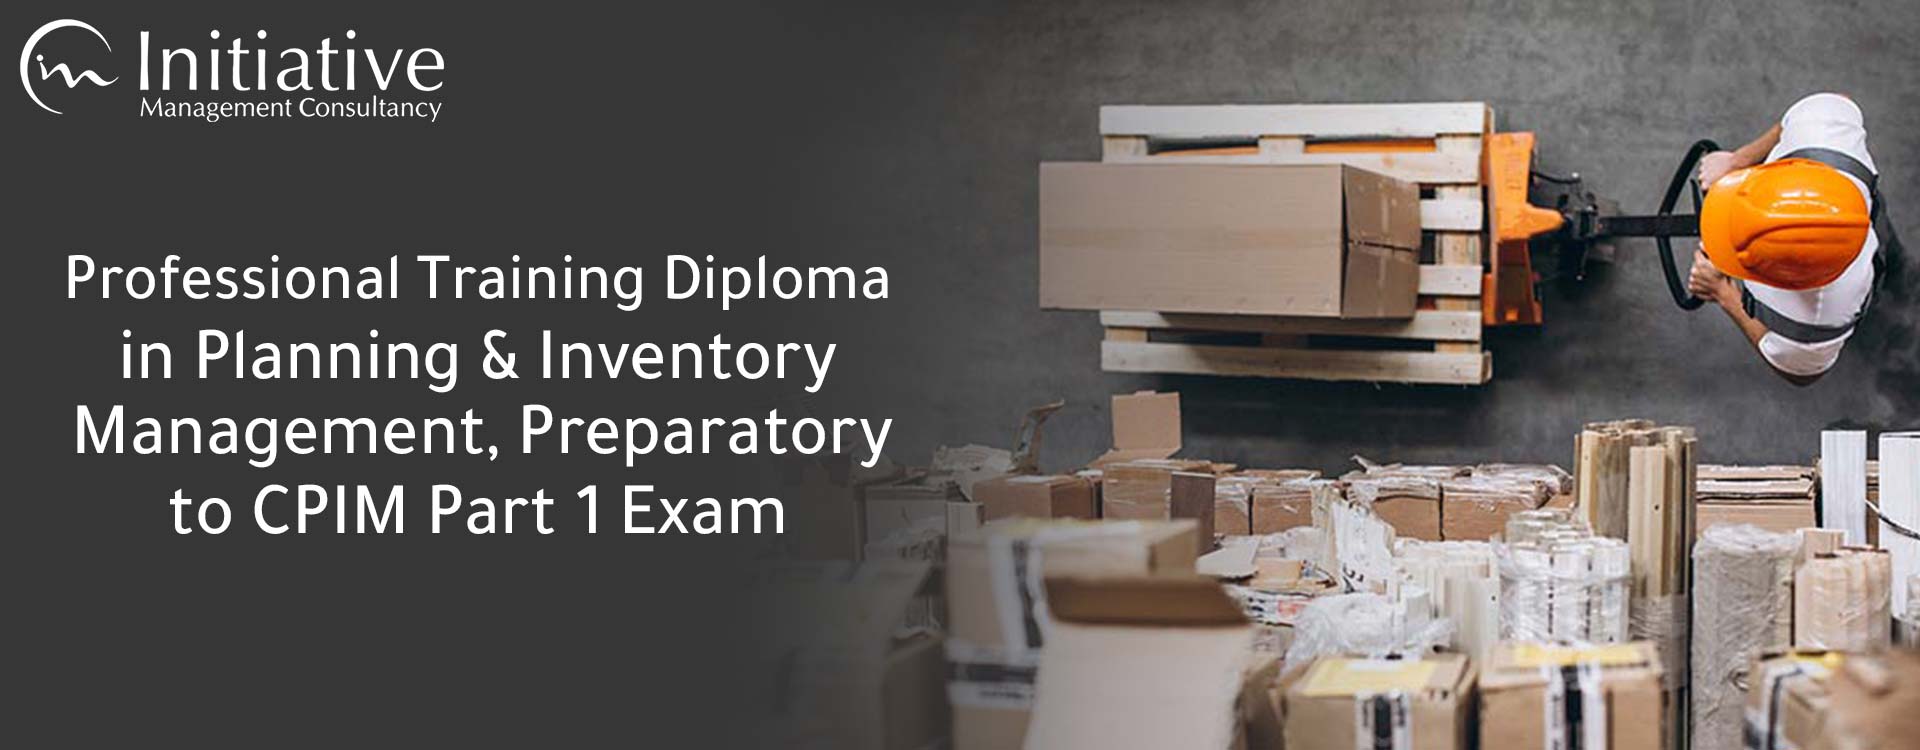 Professional Diploma of Certified in Planning and Inventory Management, Preparatory to CPIM Part 1 Exam